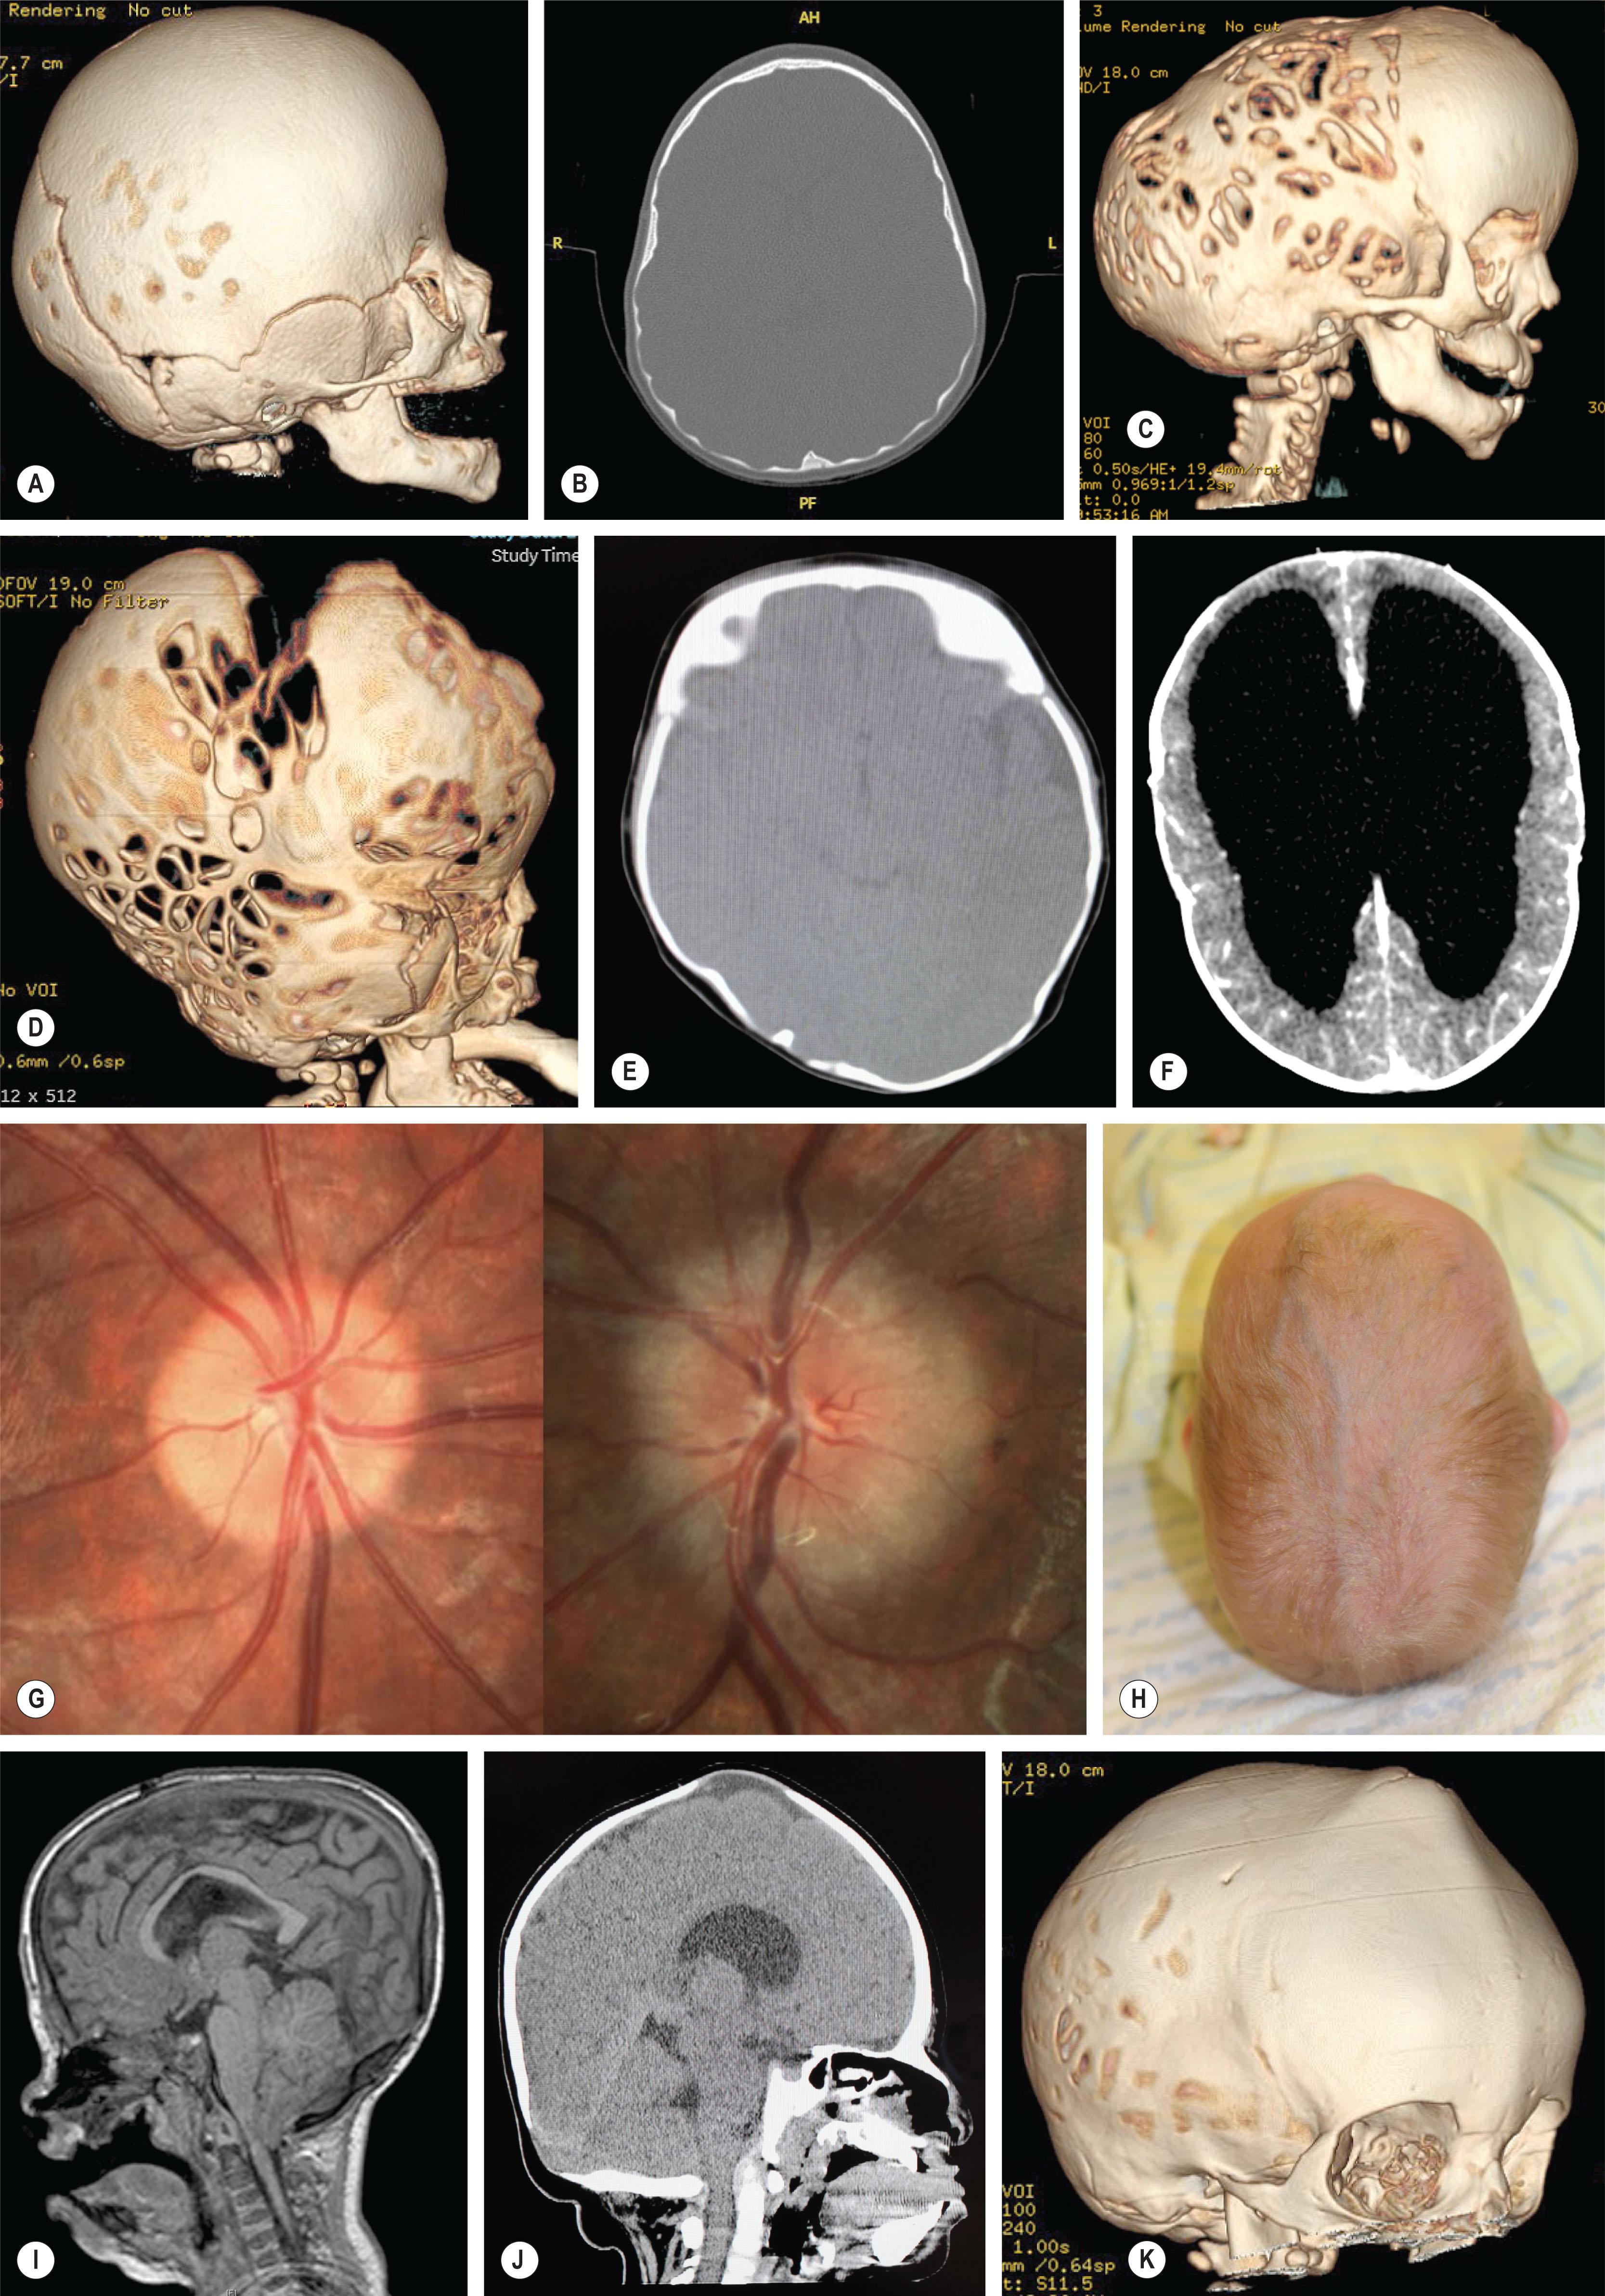 Figure 25.1.12, Indicators of elevated ICP. CT scans show areas of mild bone thinning (A) and endocranial scalloping (B) ; more severe widespread thumbprinting (C) or copper-beaten skull with indentations of the endocranial surface (Lückenschädel skull) (D) ; small compressed tight ventricles with loss of fluid in the subarachnoid space (E) ; severe hydrocephalus (F) ; fundoscopic view showing active papilledema on the right with moderate disc elevation, indistinct margins and mild blurring of the blood vessels. (G) Image on the left is resolved papilledema – the margin is now distinct with no blurring of the blood vessels – the disc remains full and there is mild diffuse pallor; dilated veins on the scalp of an infant with sagittal synostosis due to intracranial shunting of blood through the cutaneous circulation as the result of venous hypertension suggestive of elevated ICP (H) ; Chiari I malformation with descent of the cerebellar tonsils through the foramen magnum (I) ; bulging anterior fontanelle (J) , and 3D CT scan showing bone growth around the bulging anterior fontanelle that can resemble a volcanic crater and is known as the volcano sign (K) .